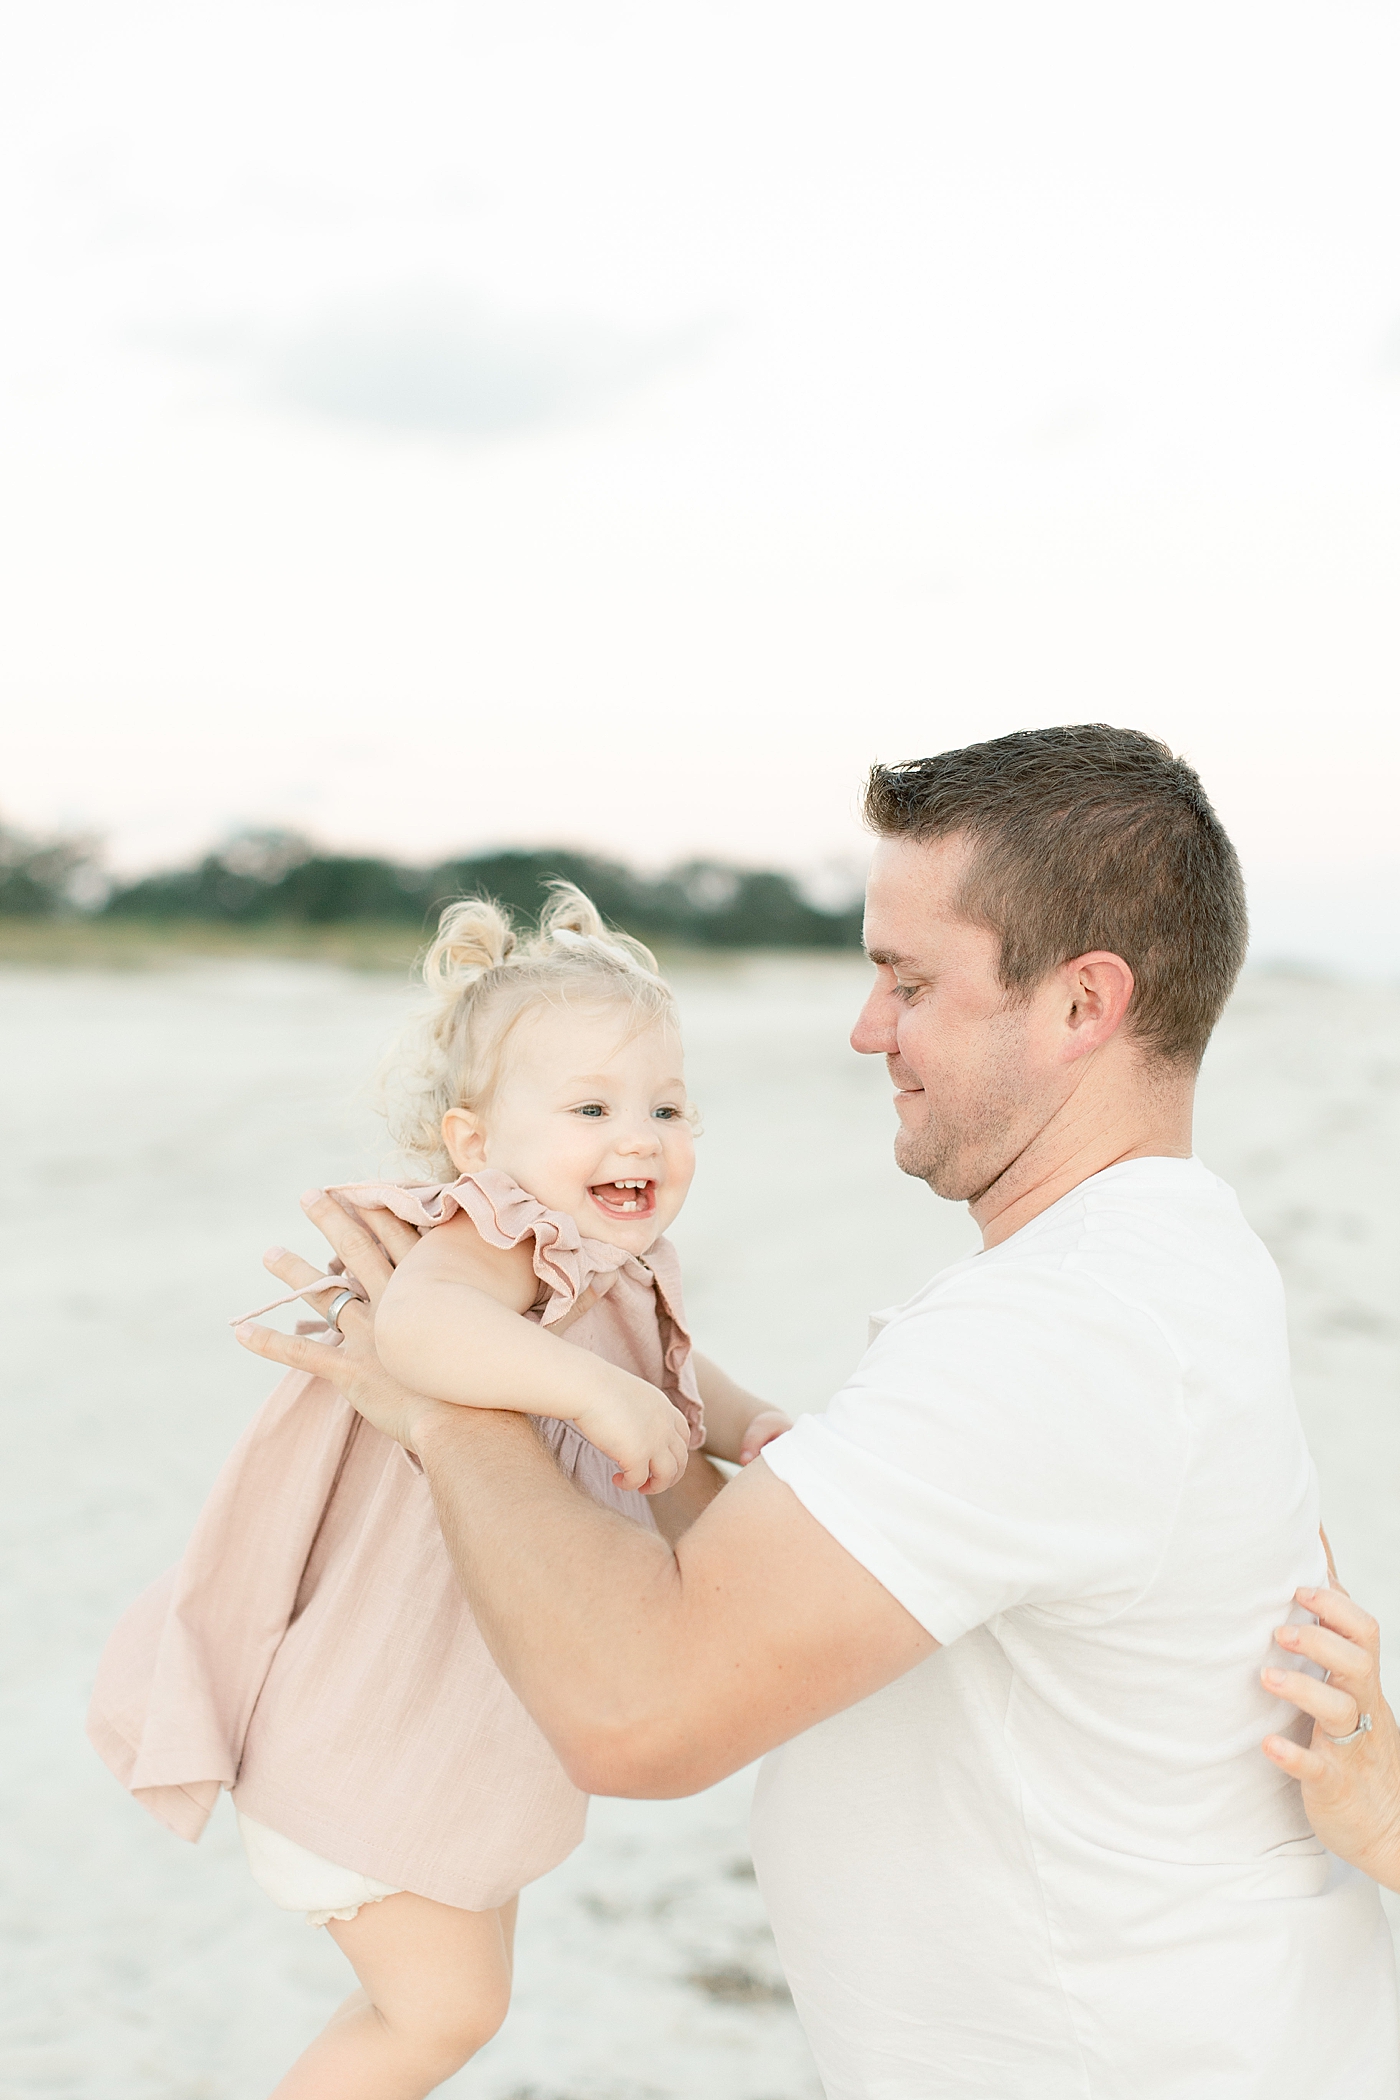 Dad holding toddler baby in a pink dress on the beach | Photo by Little Sunshine Photography